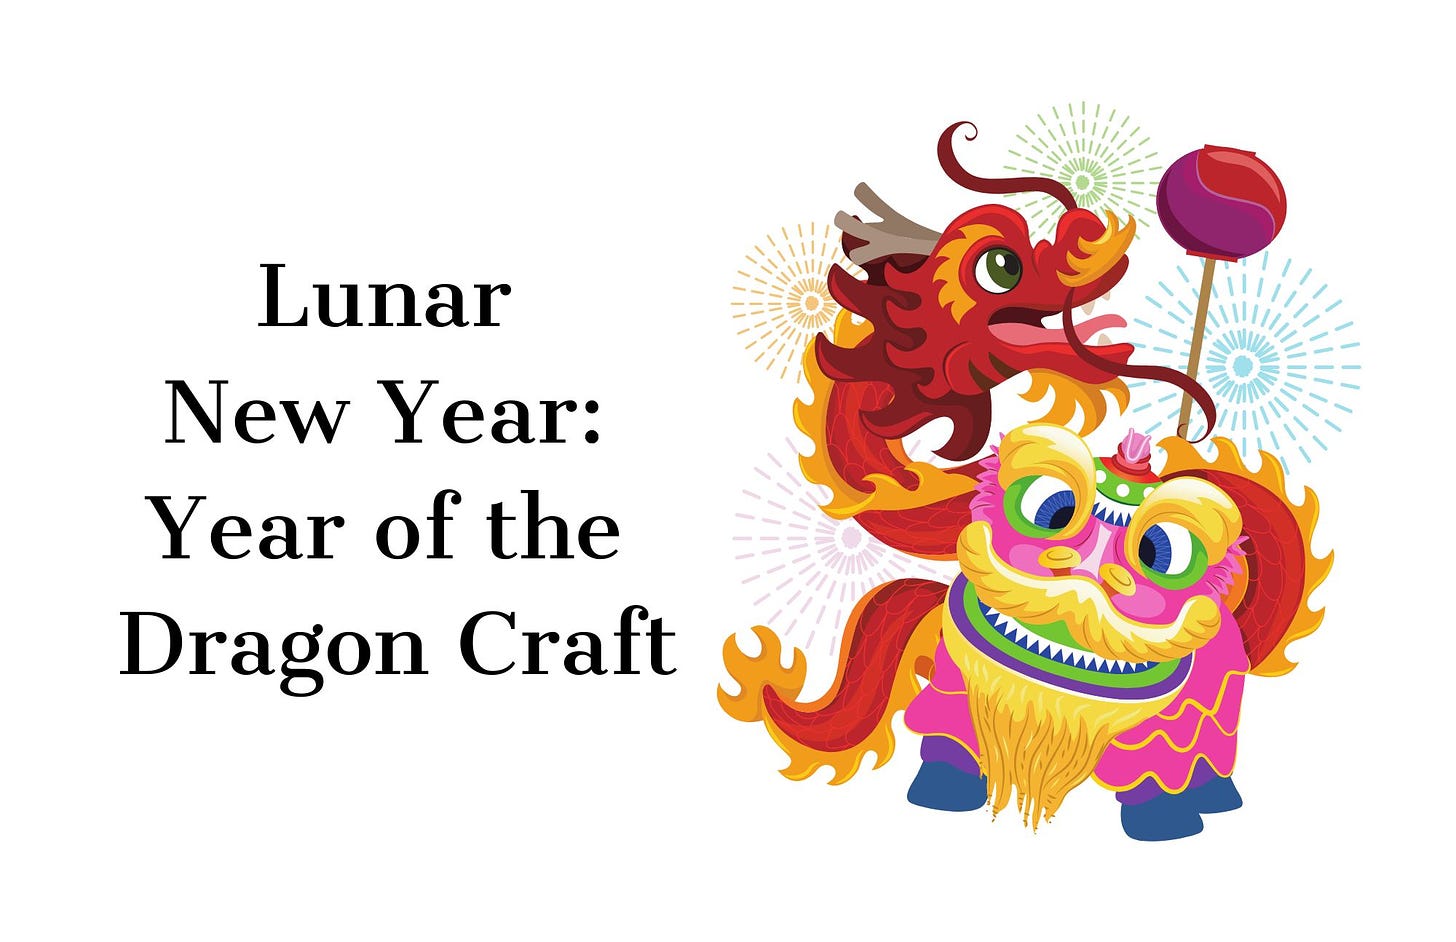 Take Your Child To the Library Month: Lunar New Year: Year of the Dragon Craft